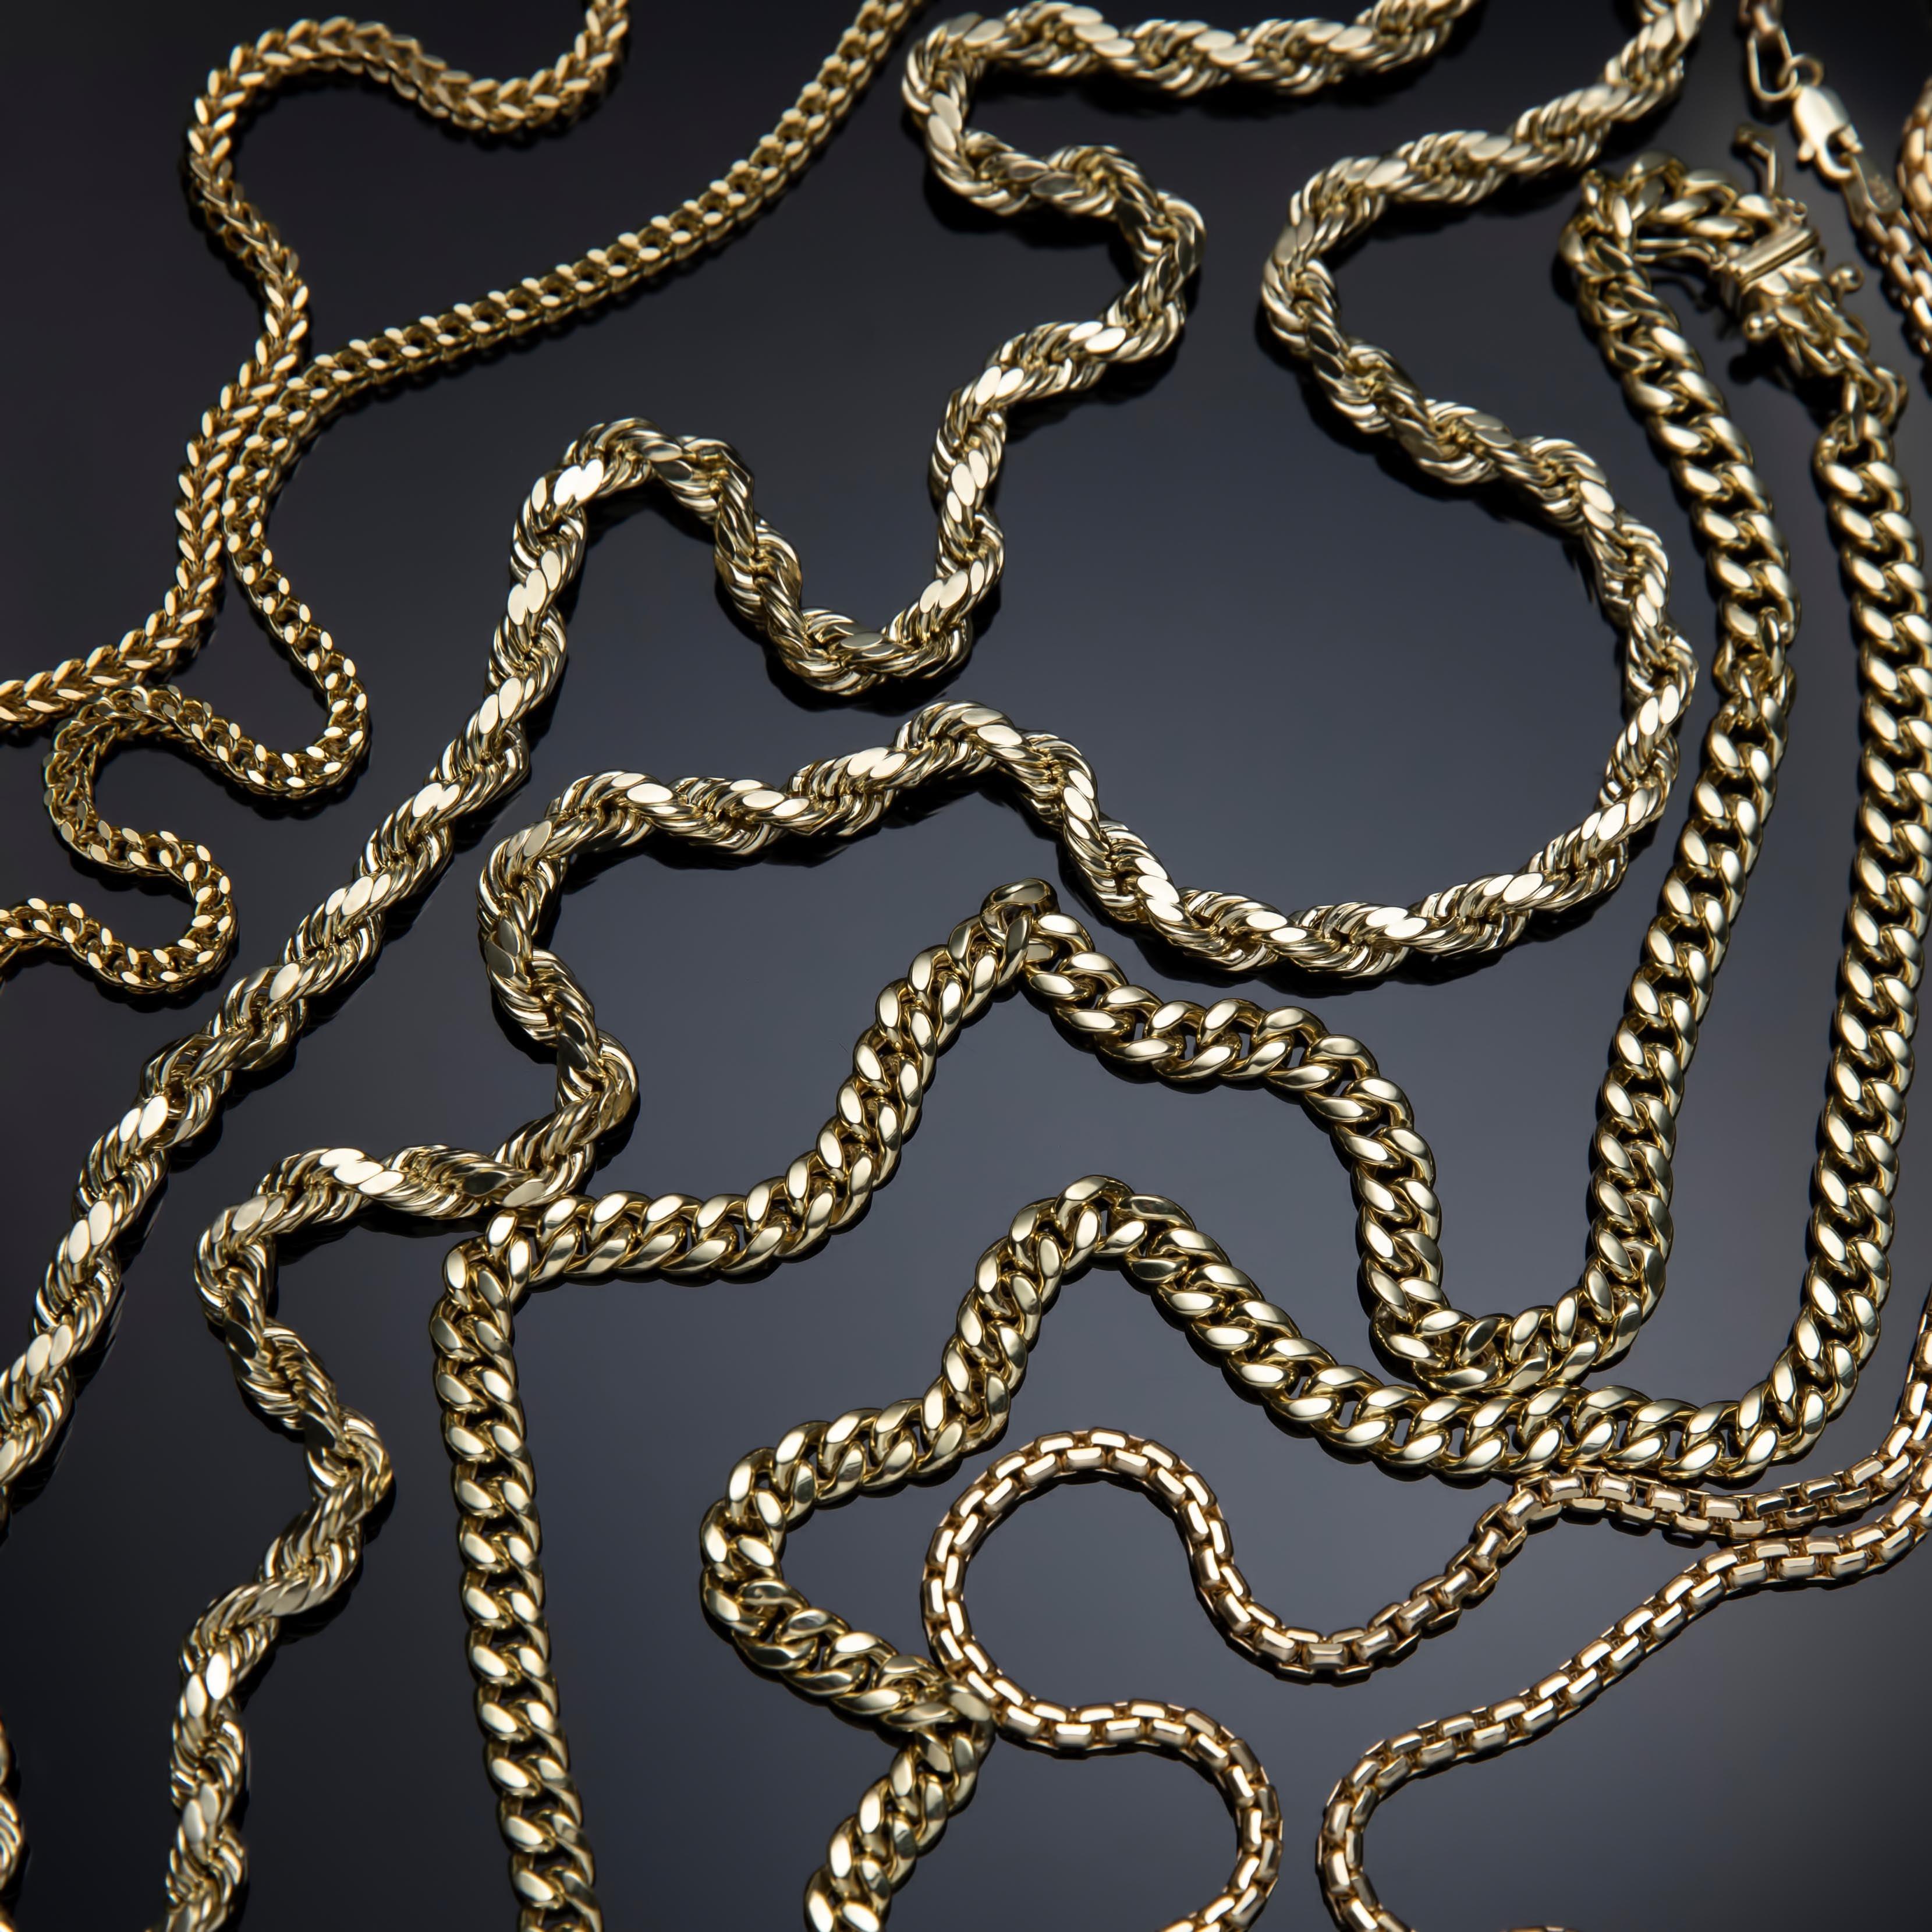 Cuban Chain vs. Rope Chain: Which One Is Better?